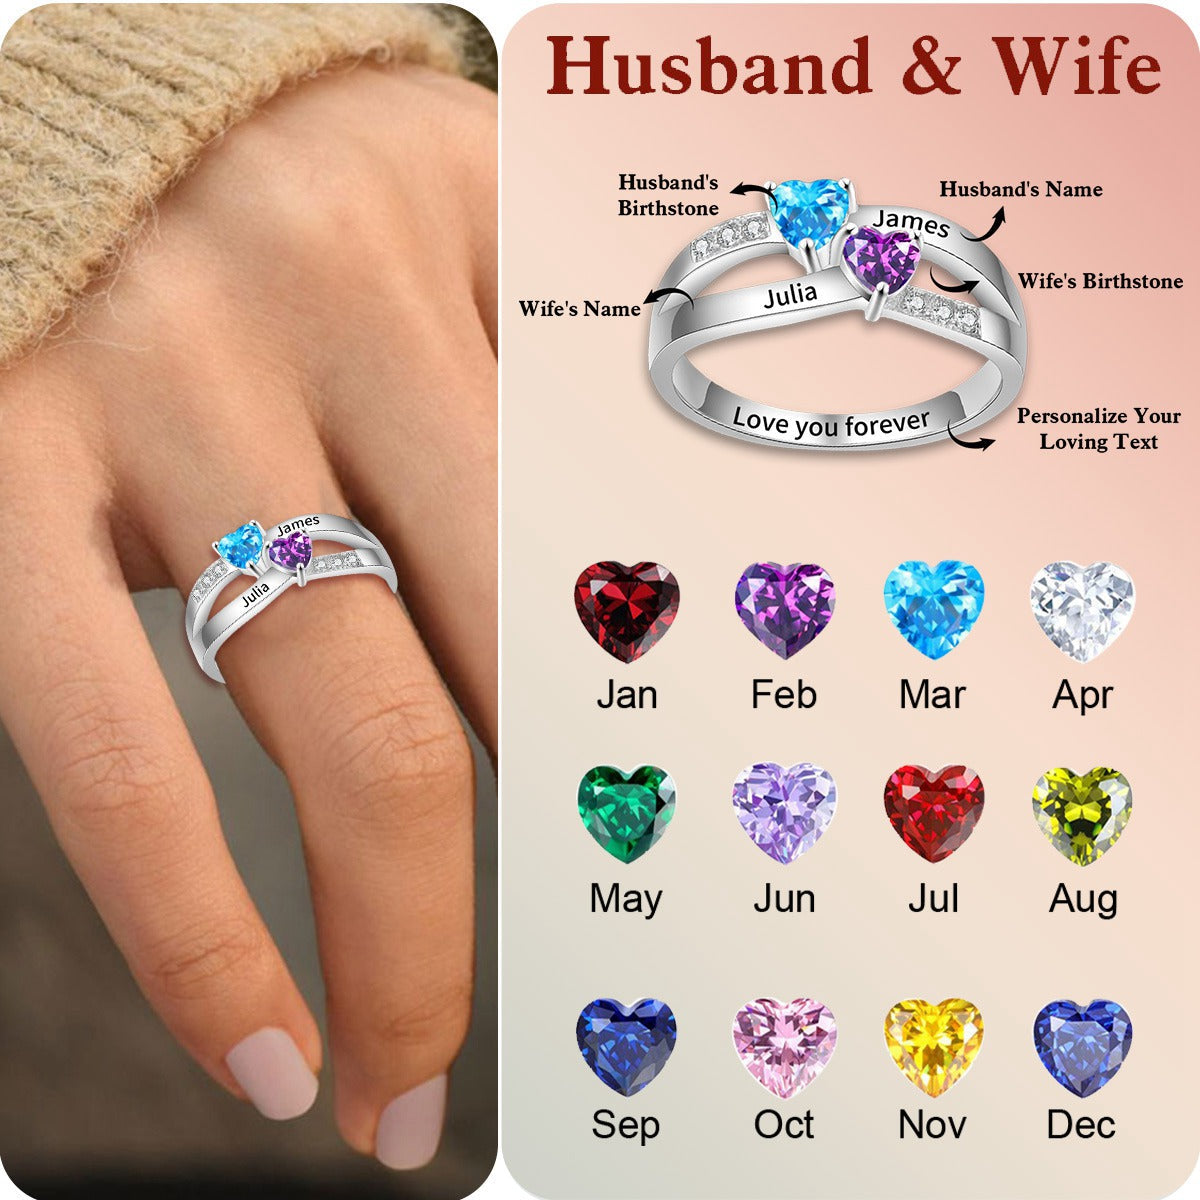 Love You Forever - Personalized Promise Birthstones Ring